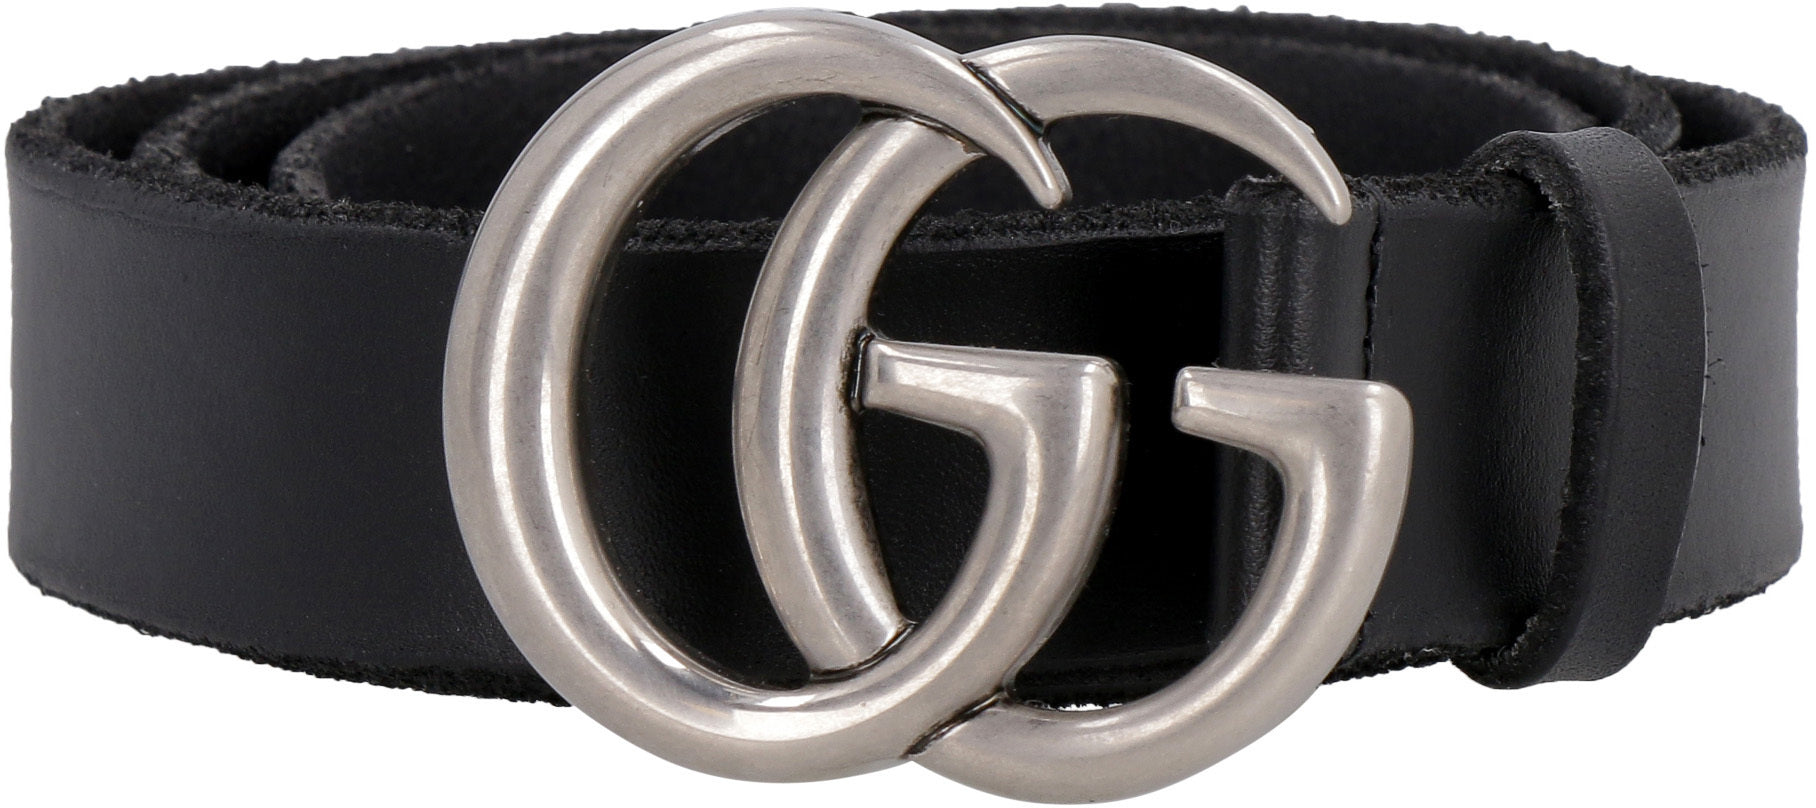 Shop Gucci Stylish Men's Black Leather Belt With Antiqued Silver-tone Double G Buckle